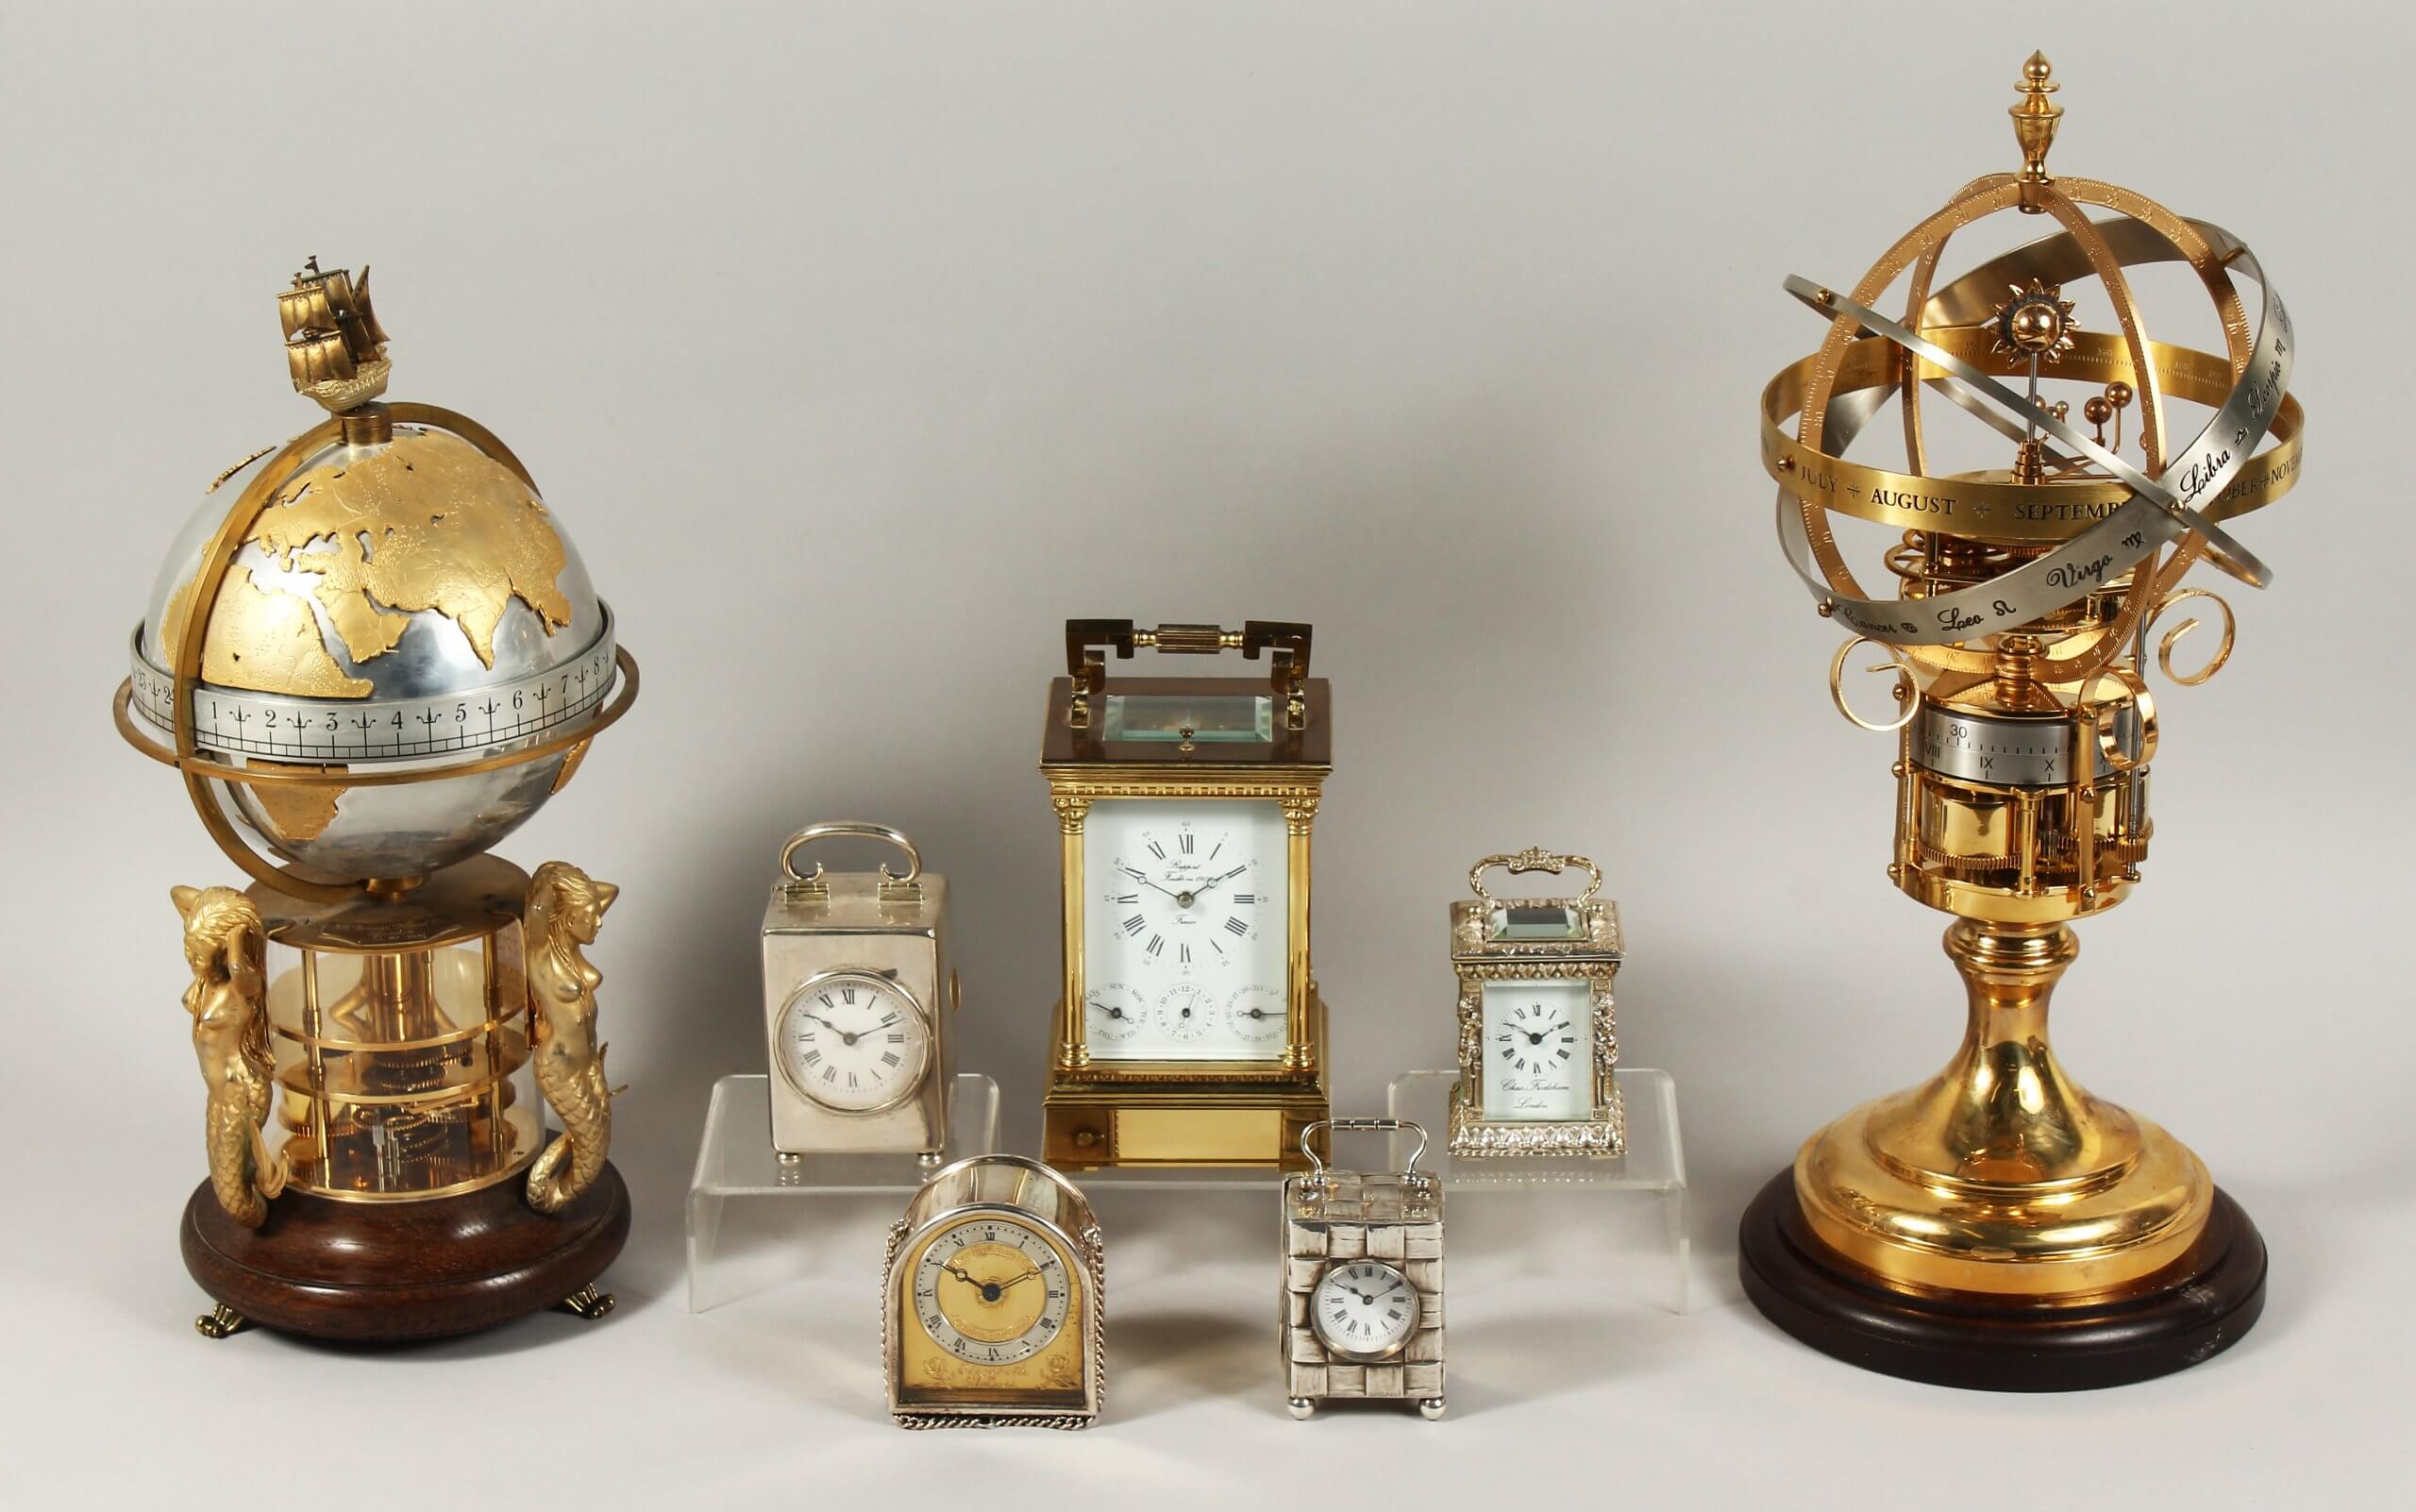 Various clocks from an interesting collection